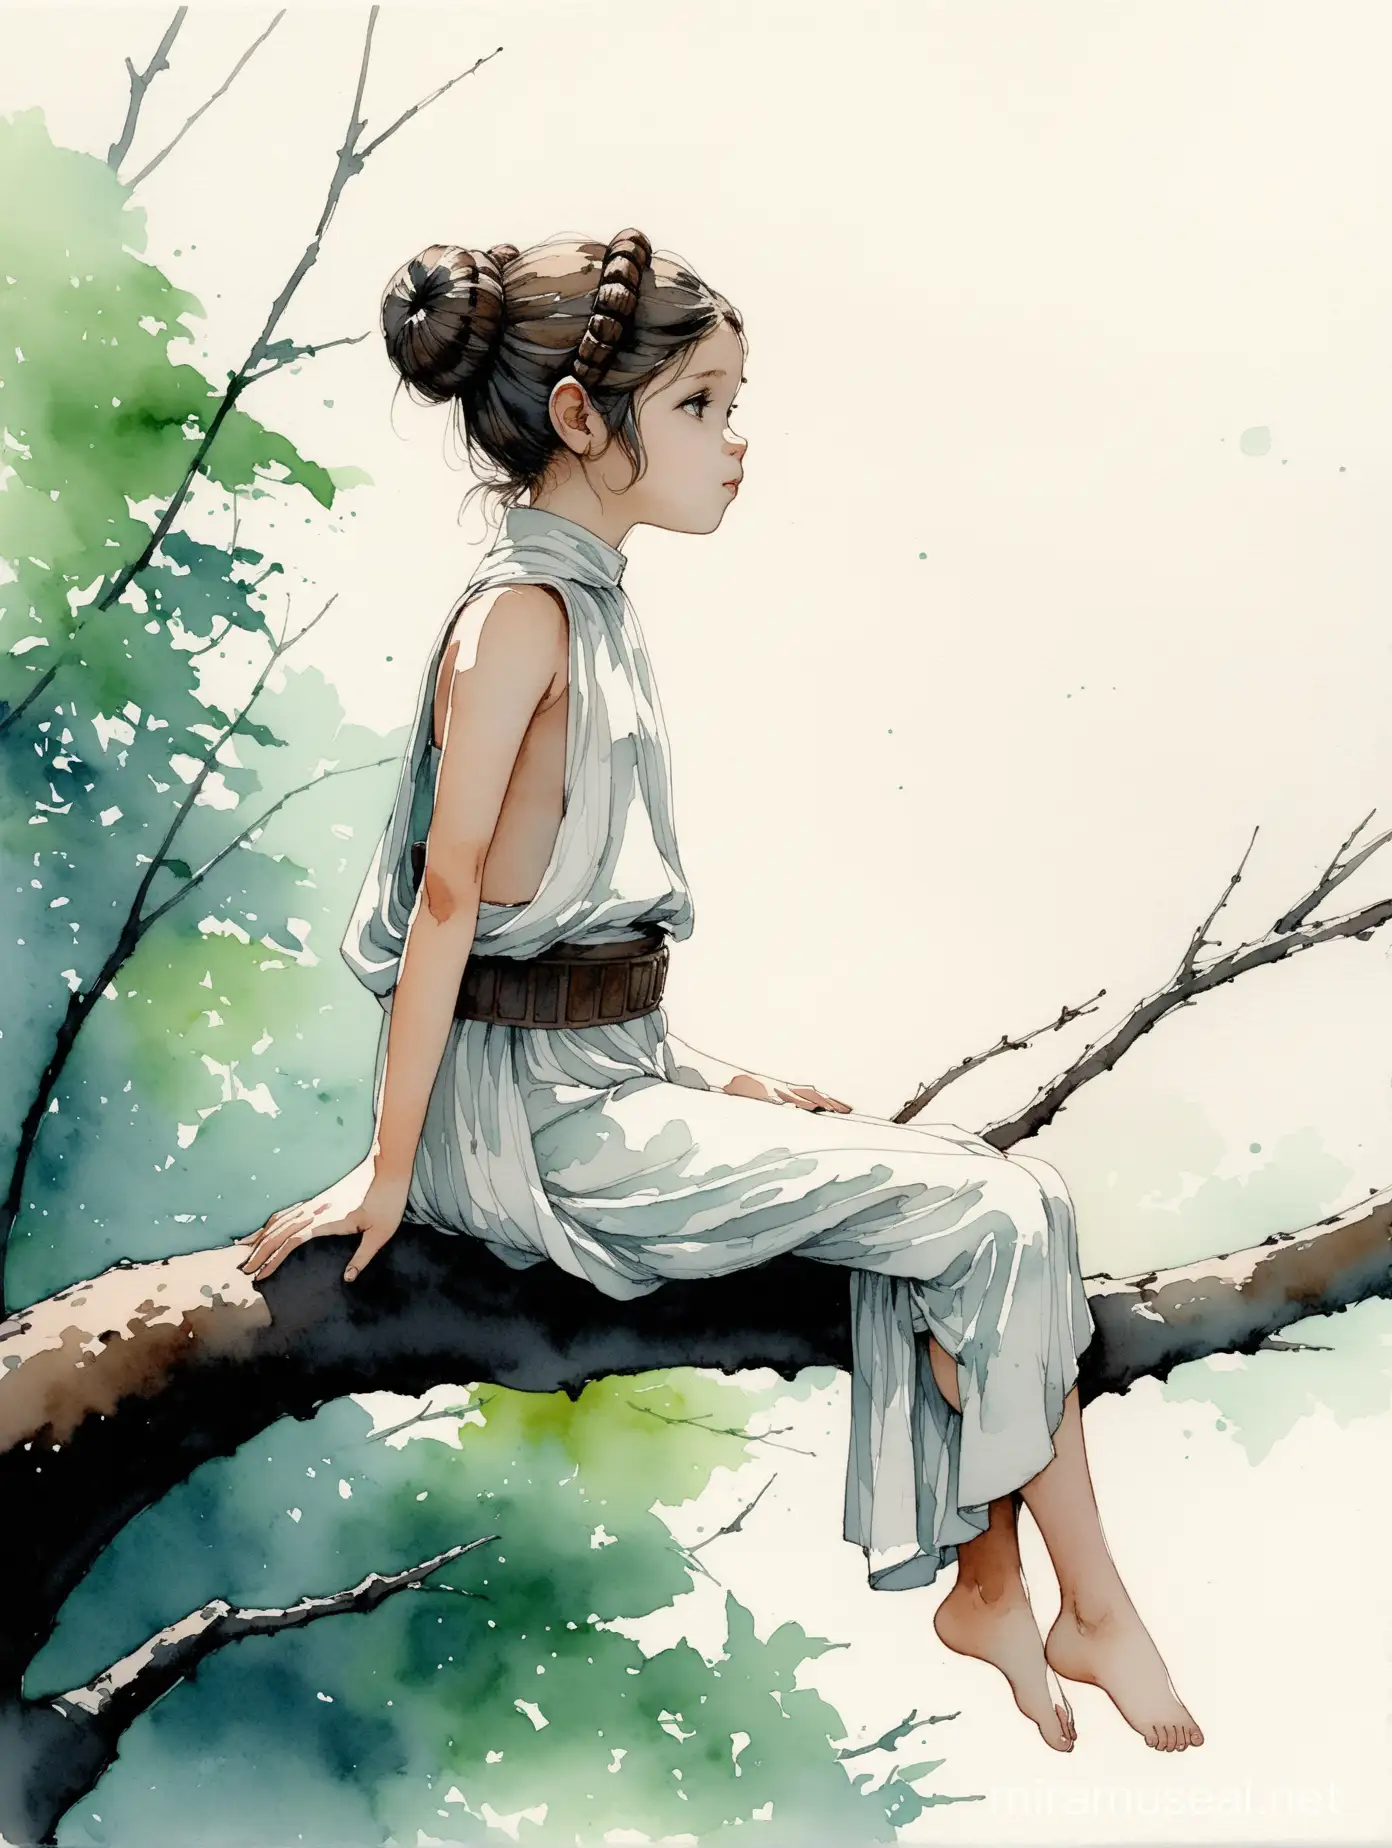 Alex Maleev messy watercolor illustration depicting child Princess Leia sitting on a tree branch, messy watercolor, no distortion, gray palette, insanely high detail, very high quality, seen from the side